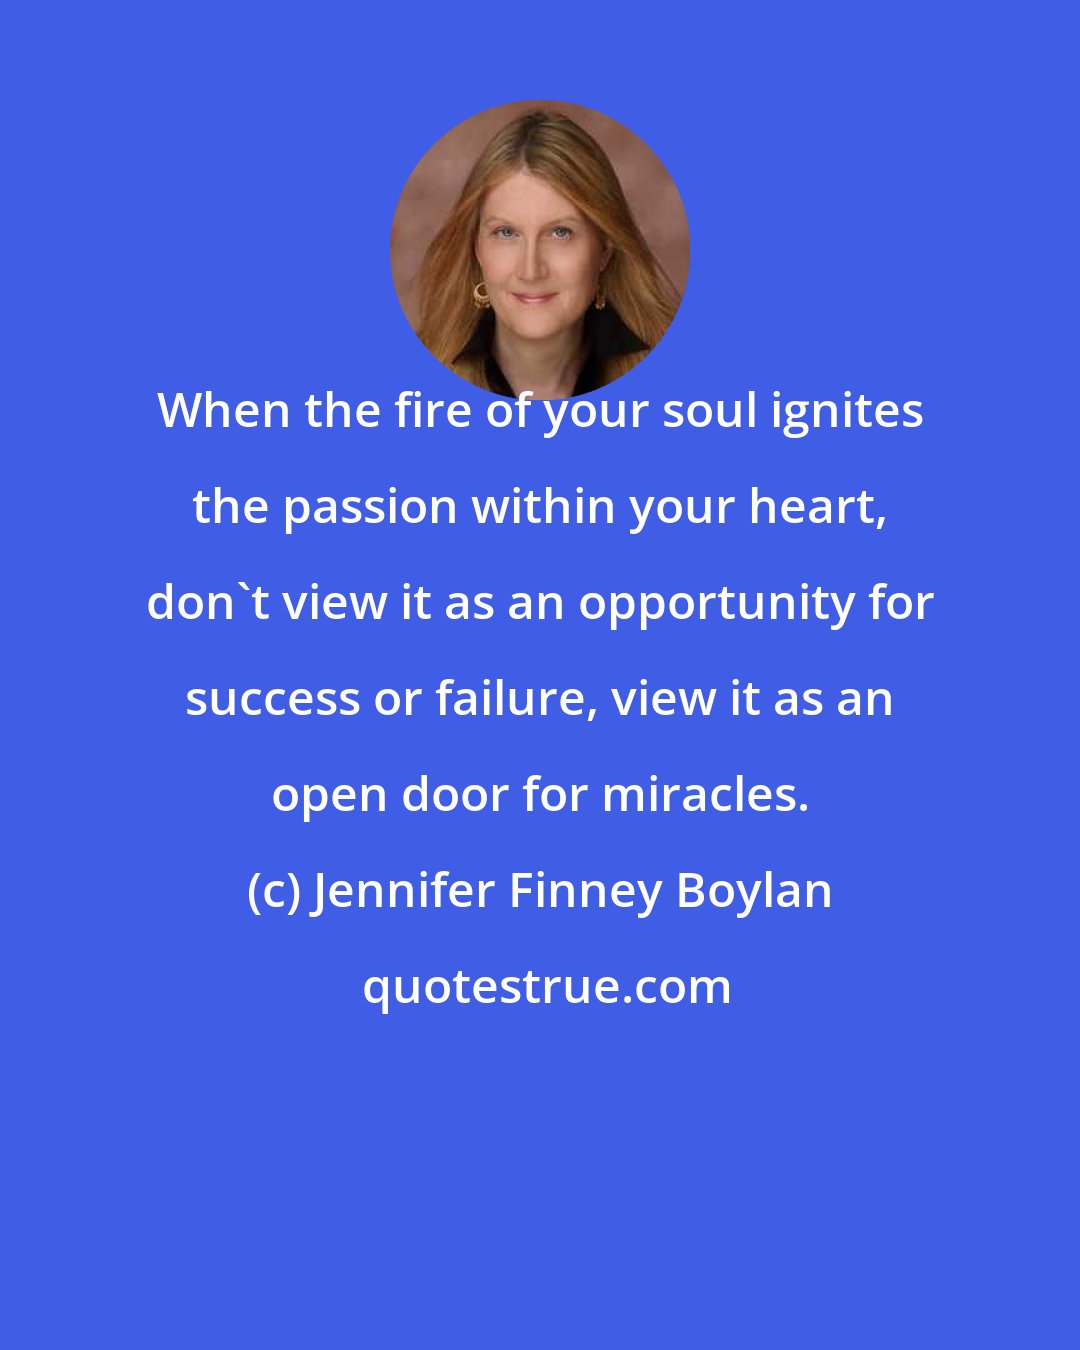 Jennifer Finney Boylan: When the fire of your soul ignites the passion within your heart, don't view it as an opportunity for success or failure, view it as an open door for miracles.